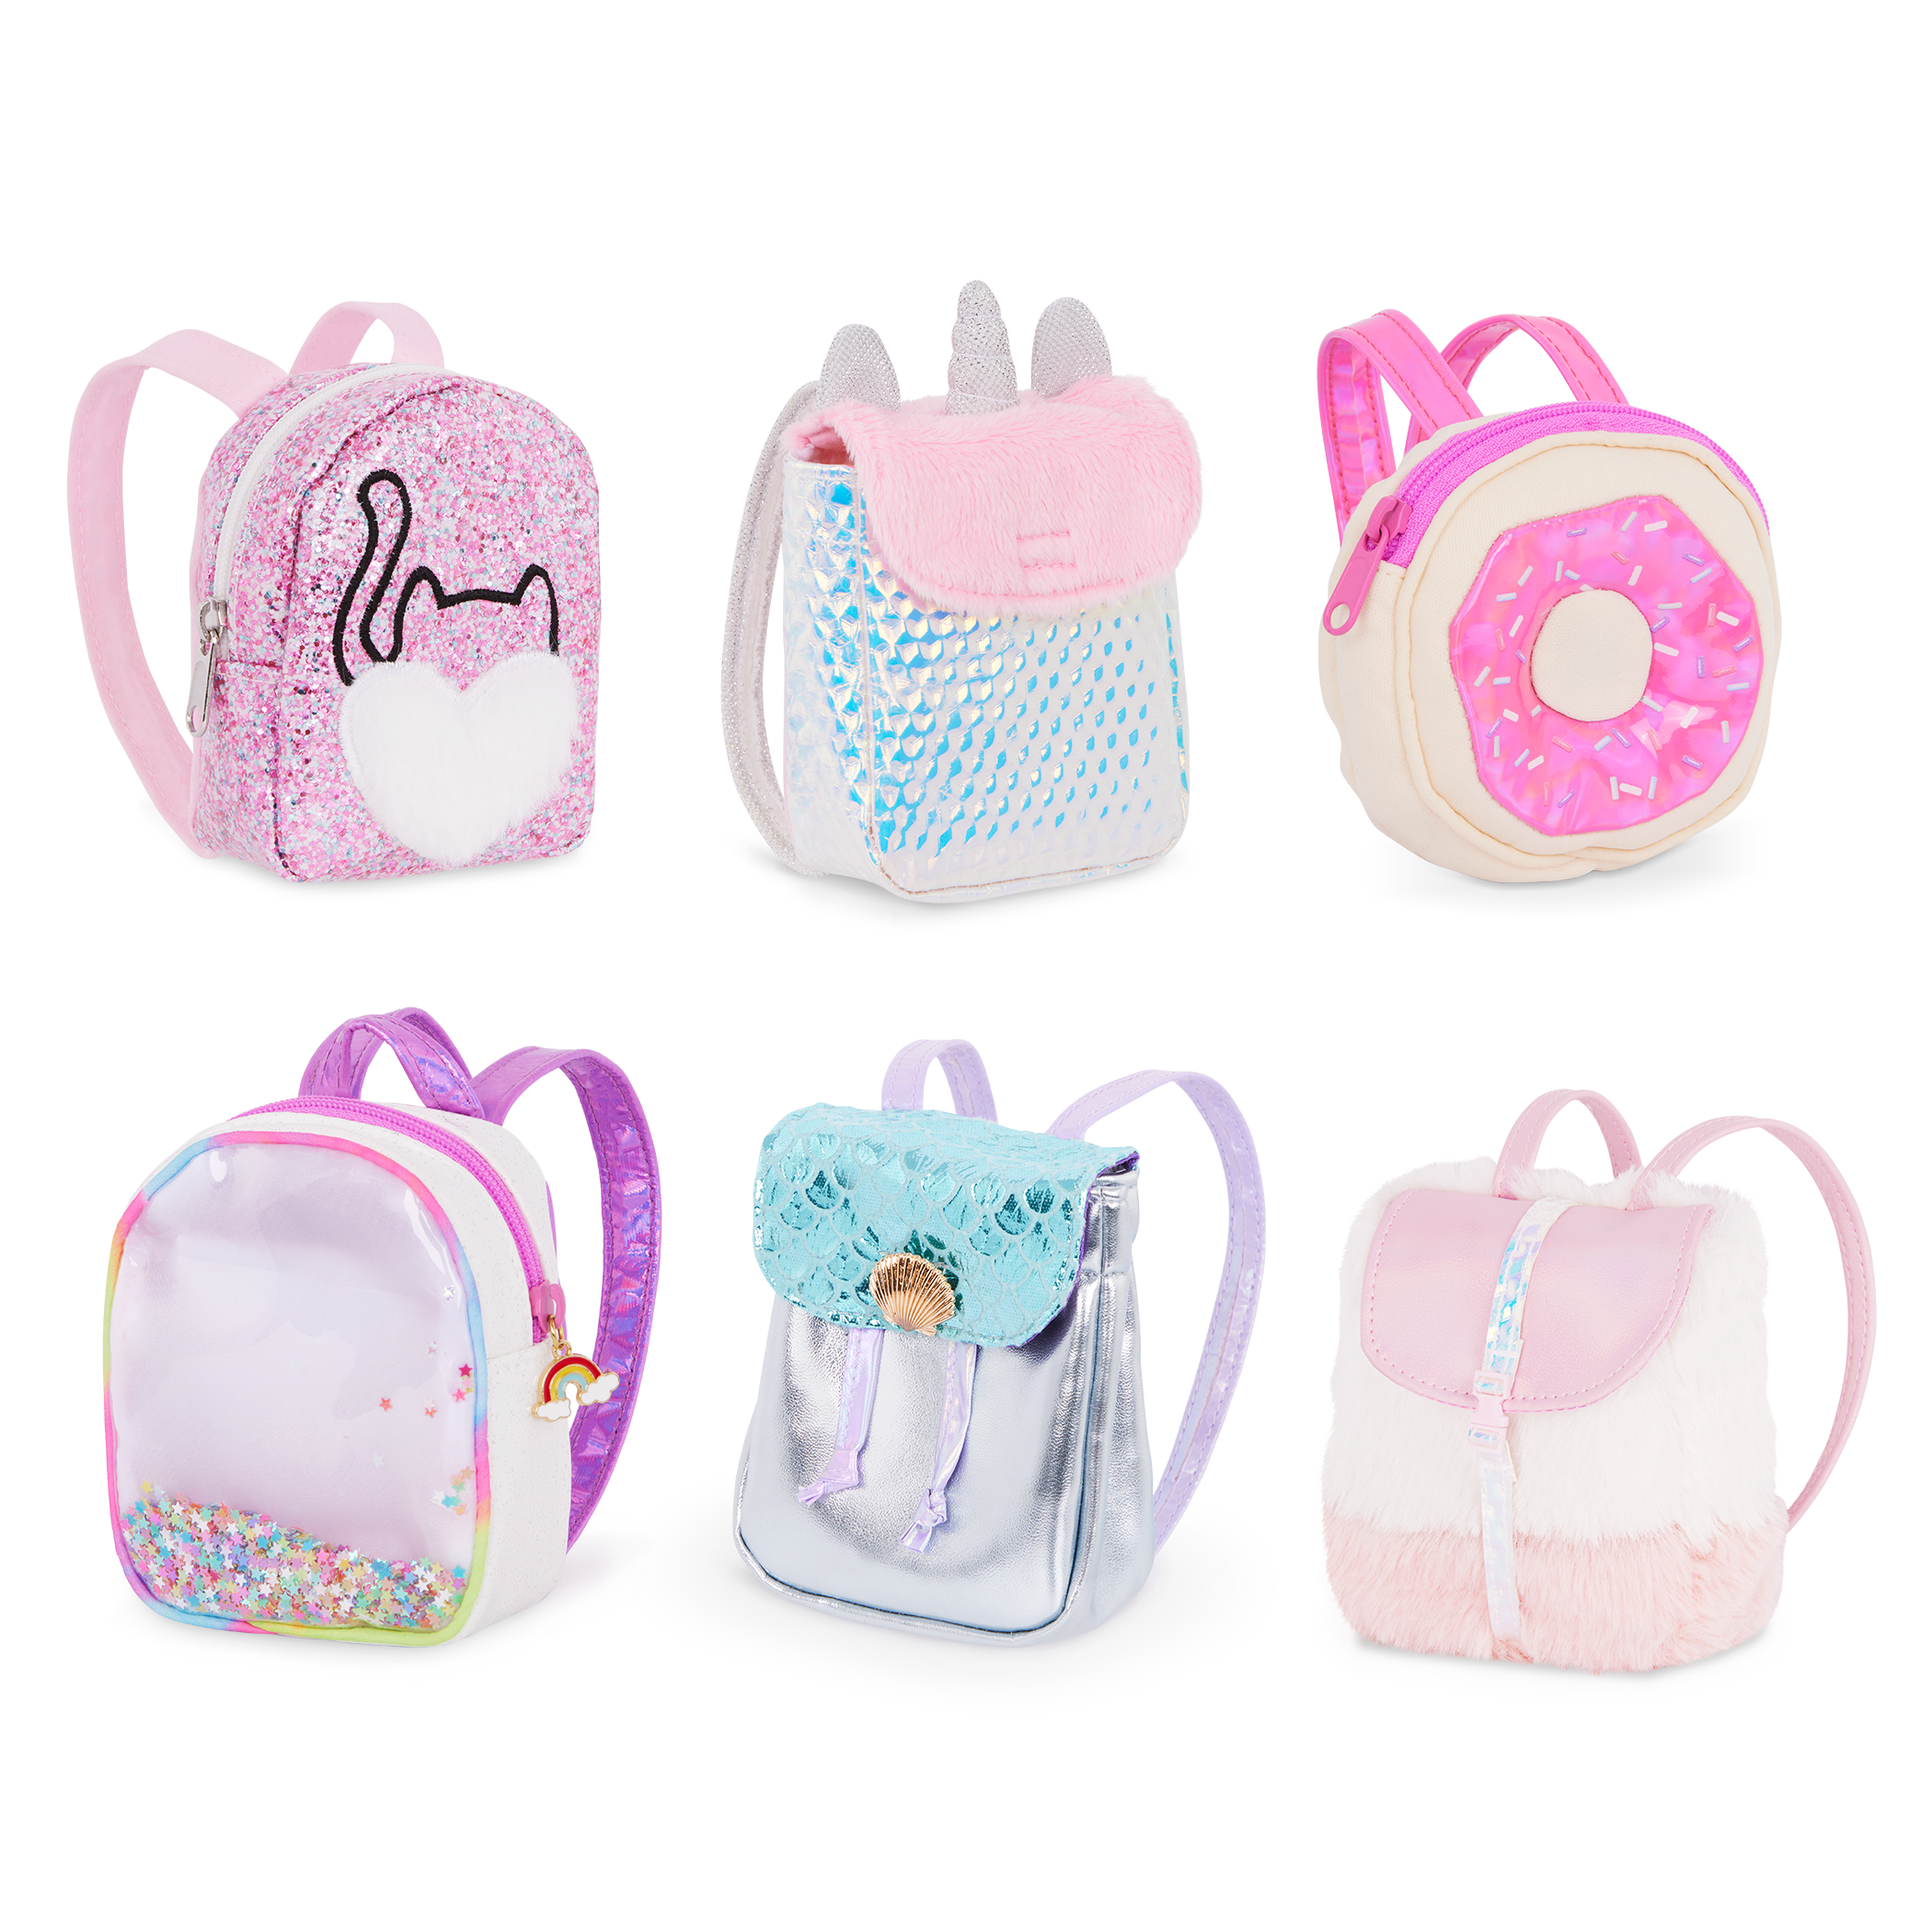 Our Generation Surprise School Bag for 18-inch Dolls 